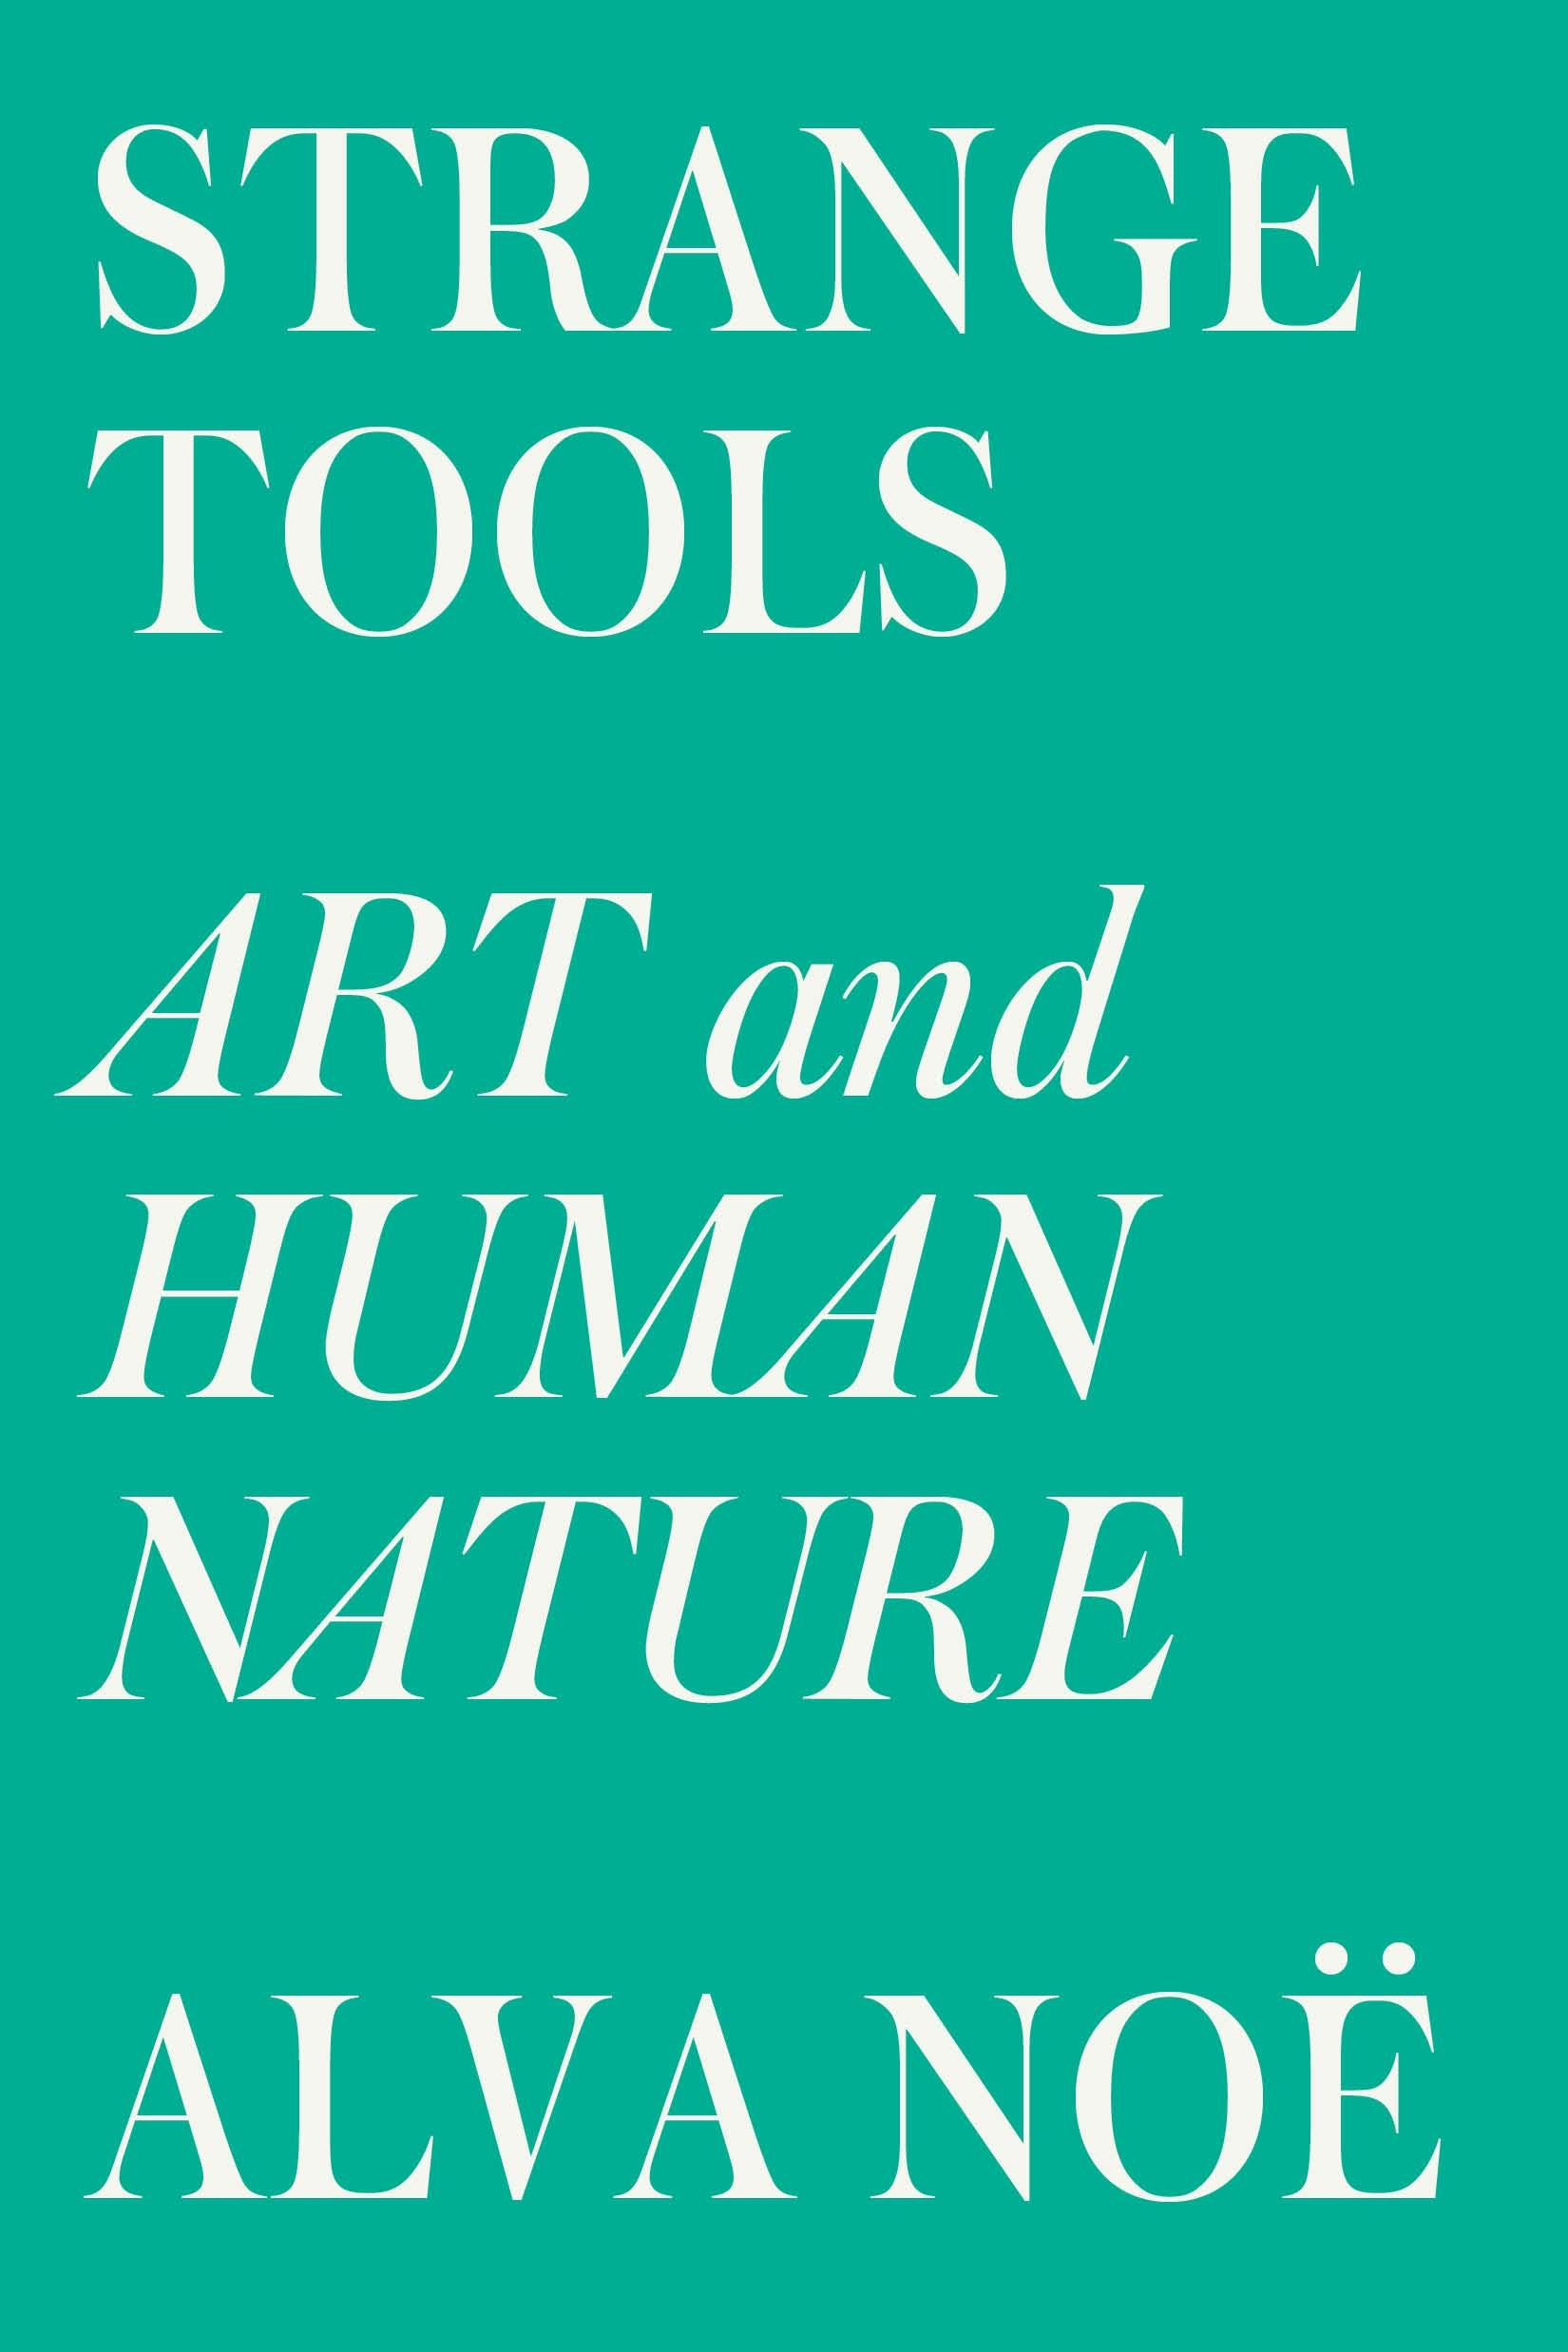 Tools of trade for artist, drawing, painting, writer and poet